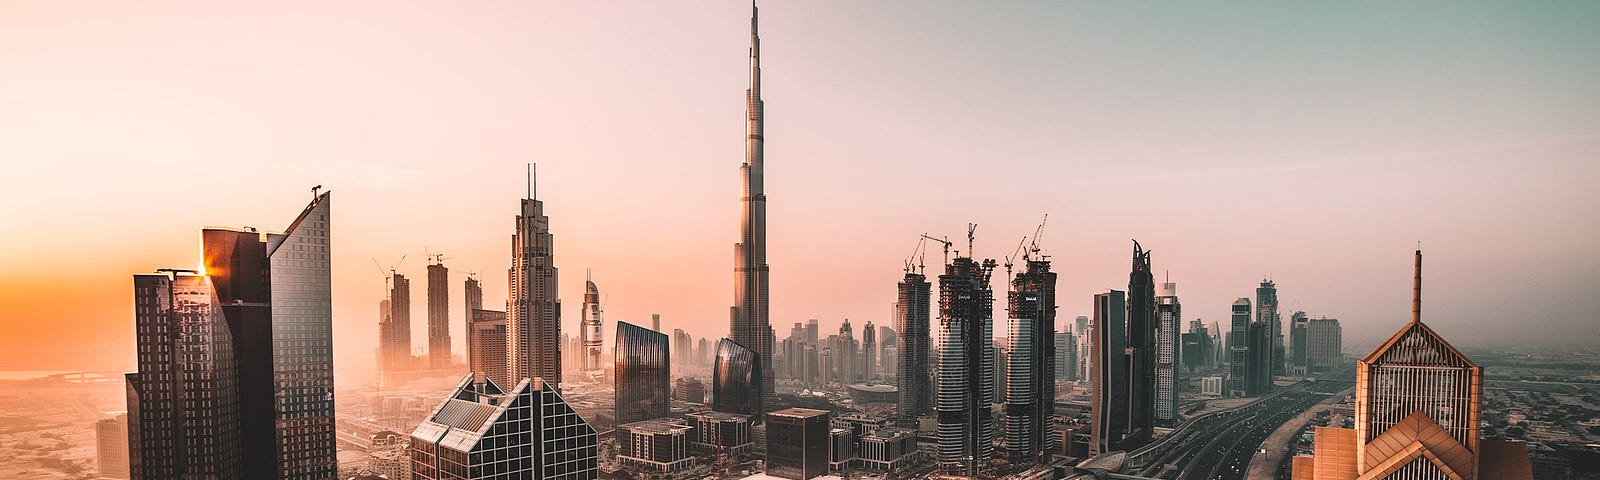 Dubai skyline for people who want to know how to find work in dubai